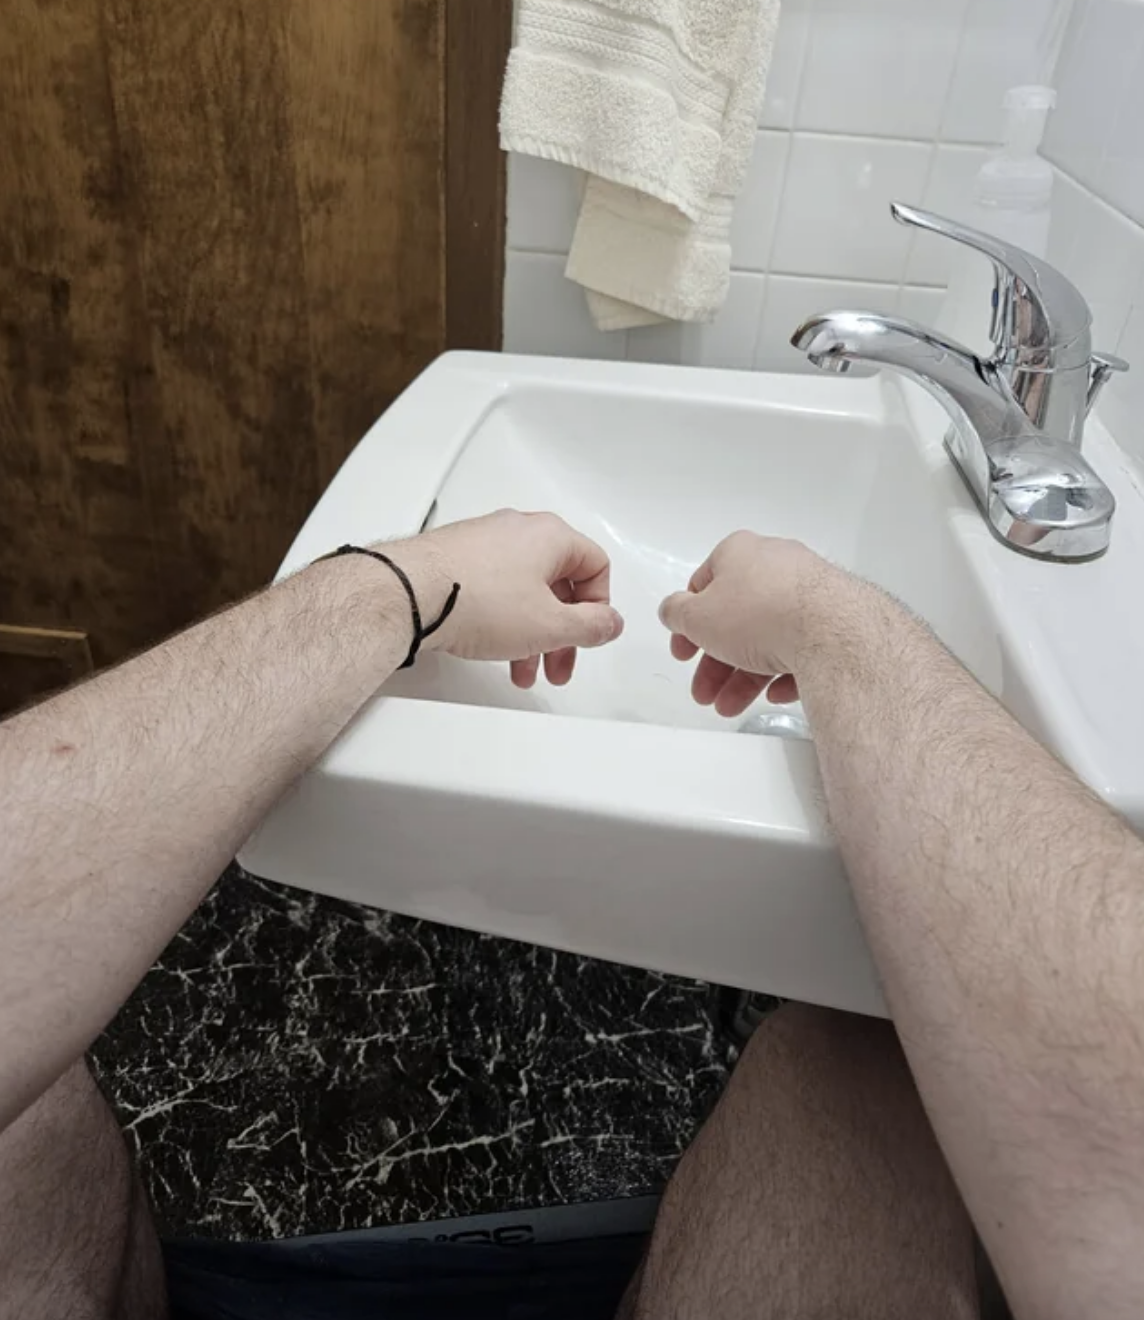 A photo taken from the perspective of someone sitting on the toilet. They can easily place their hands in the sink from where they&#x27;re seated.